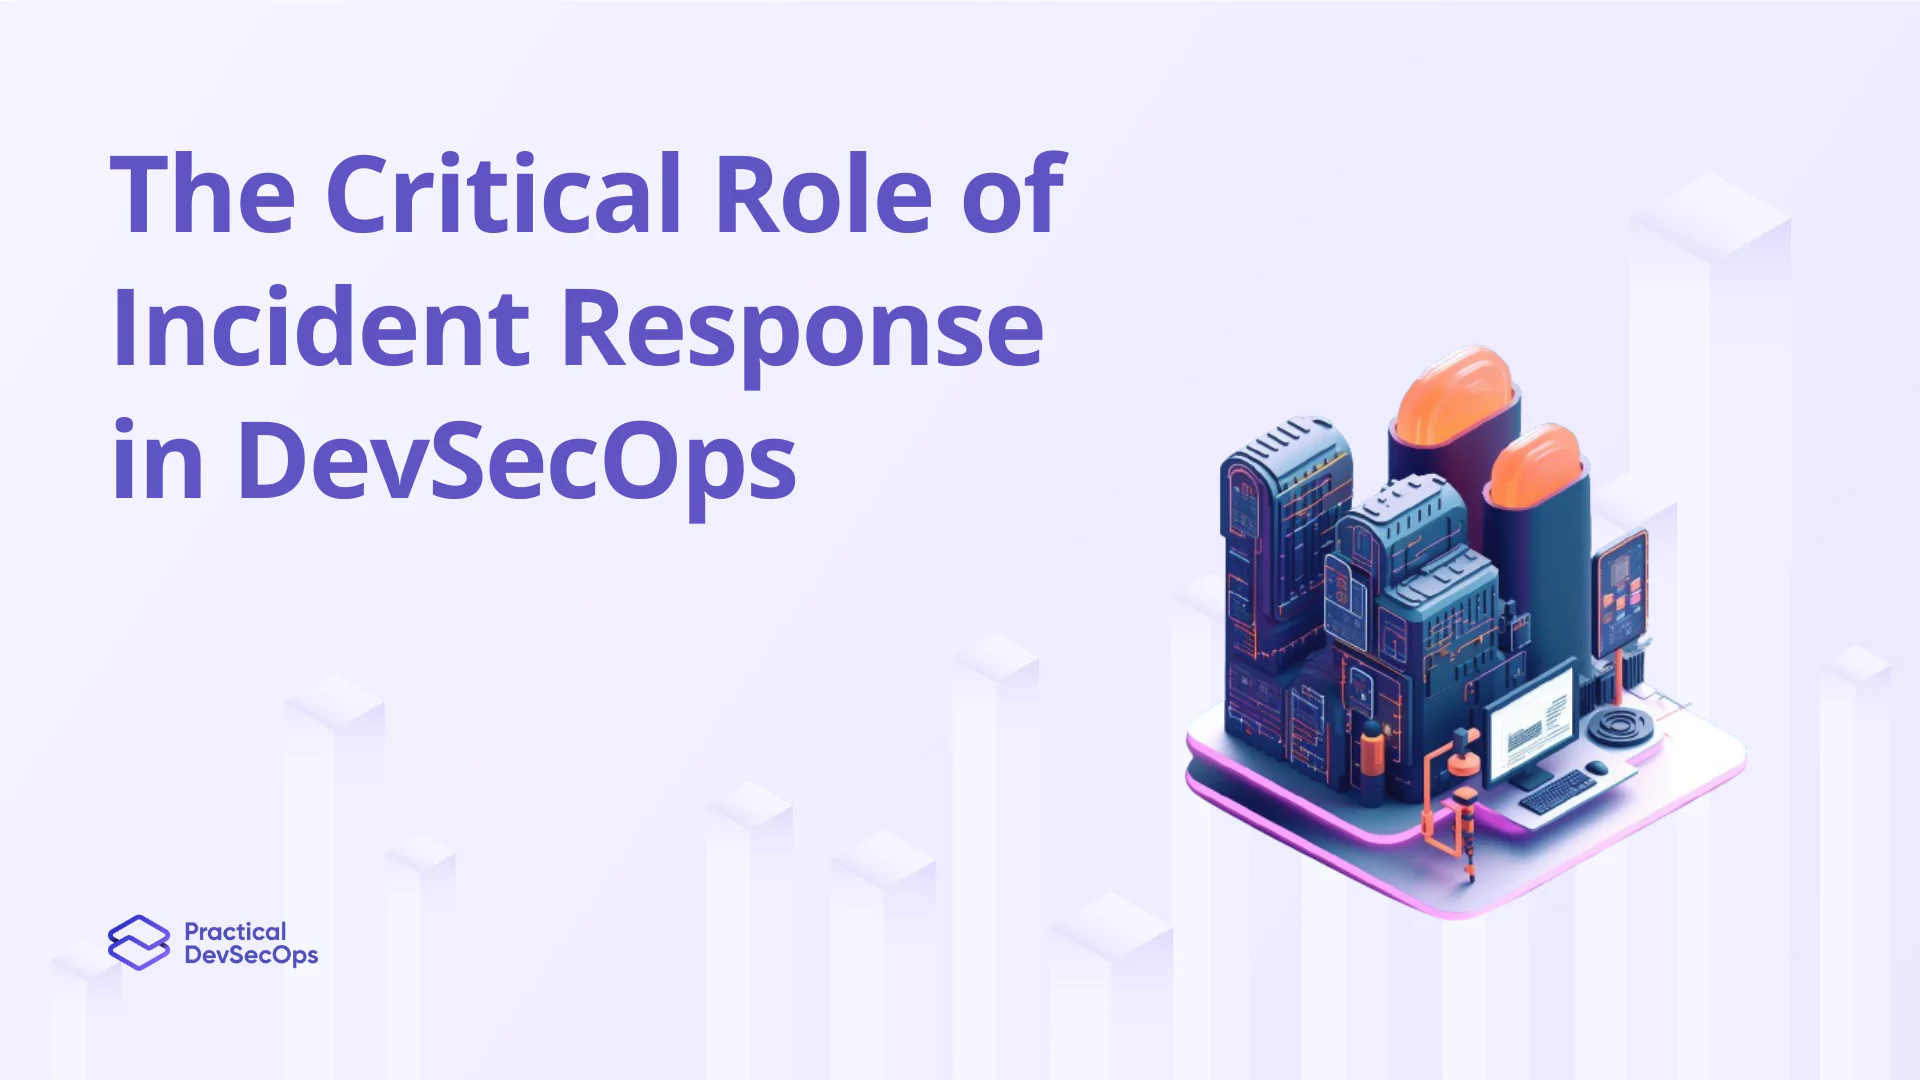 The Critical Role of Incident Response in DevSecOps